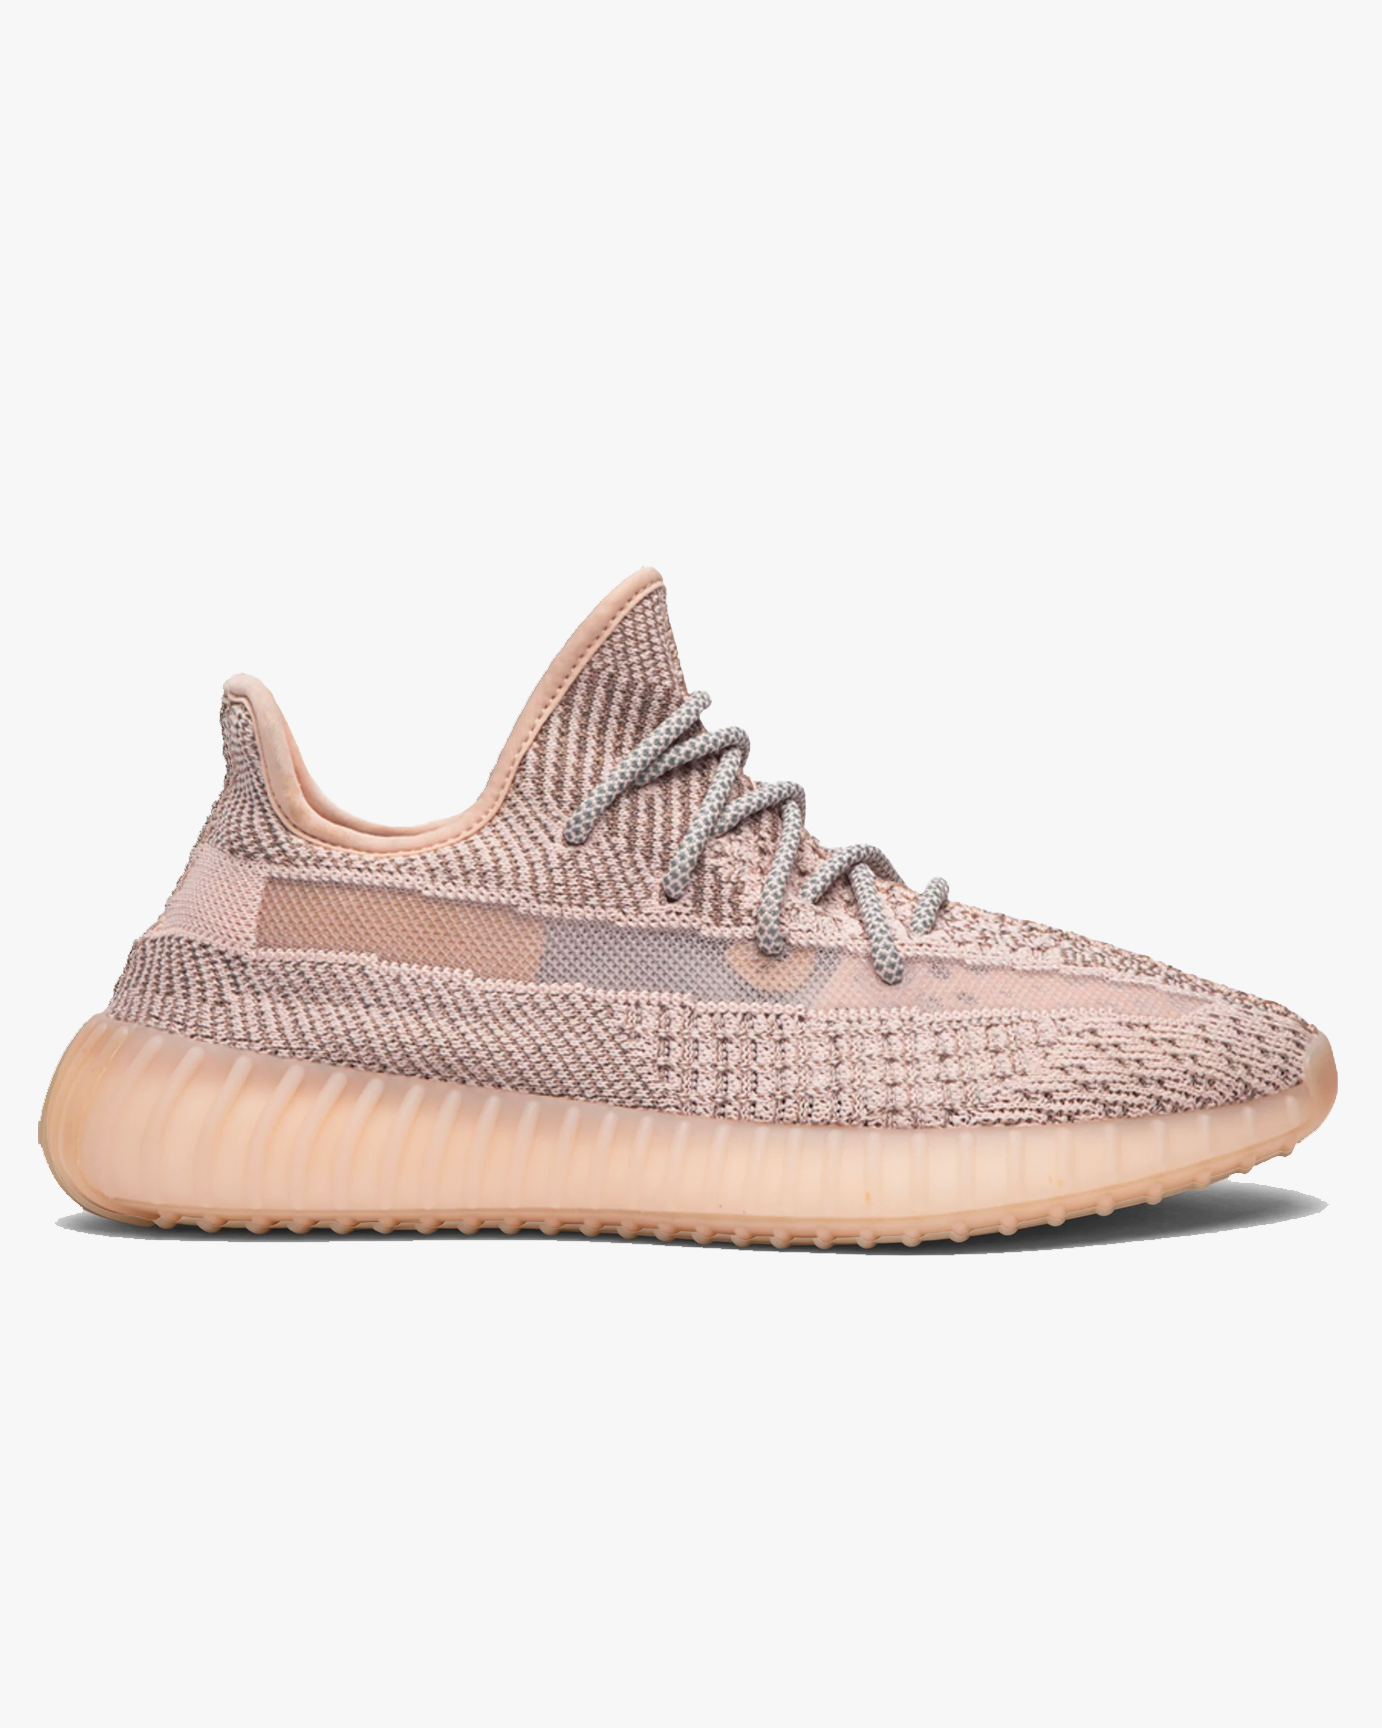 Yeezy Boost 350 V2 'Synth Non-Reflective' | RARE LAB